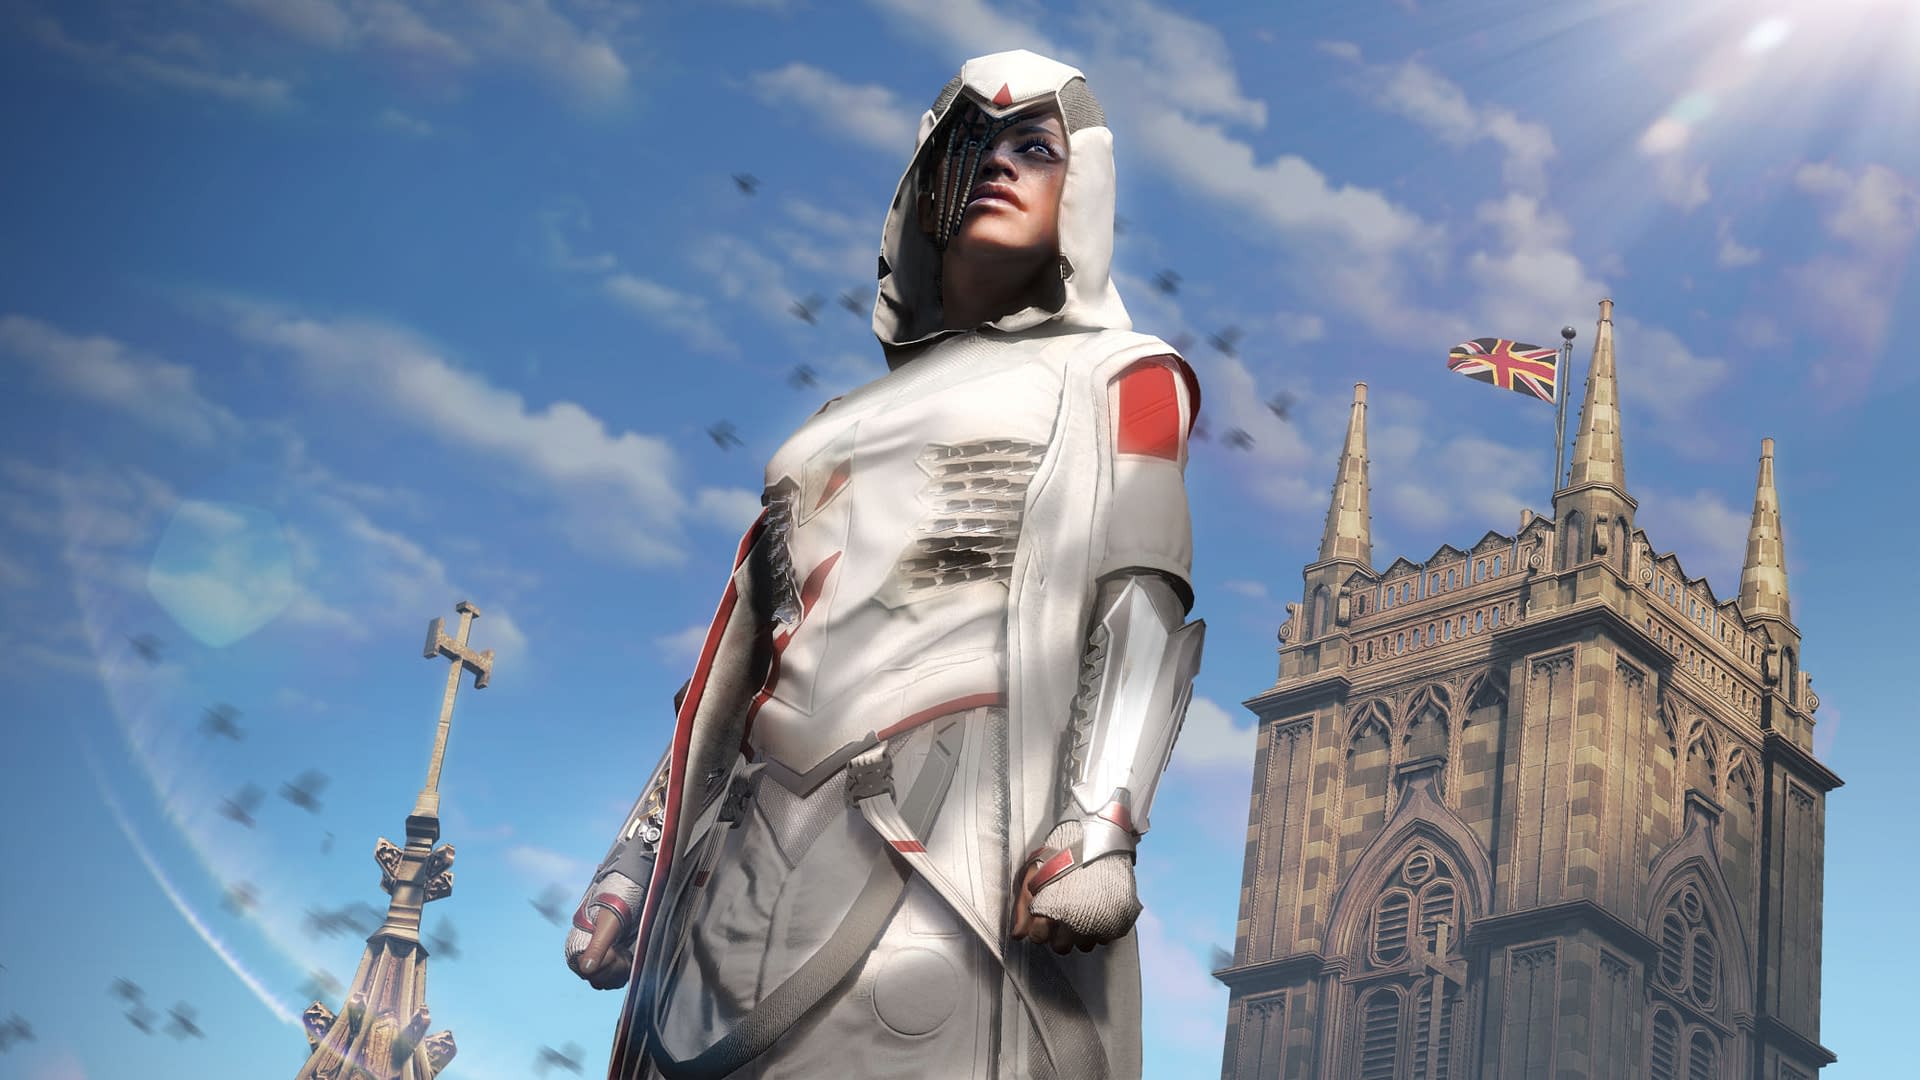 Watch Dogs: Legion's Team Provides Update Heading Into 2022